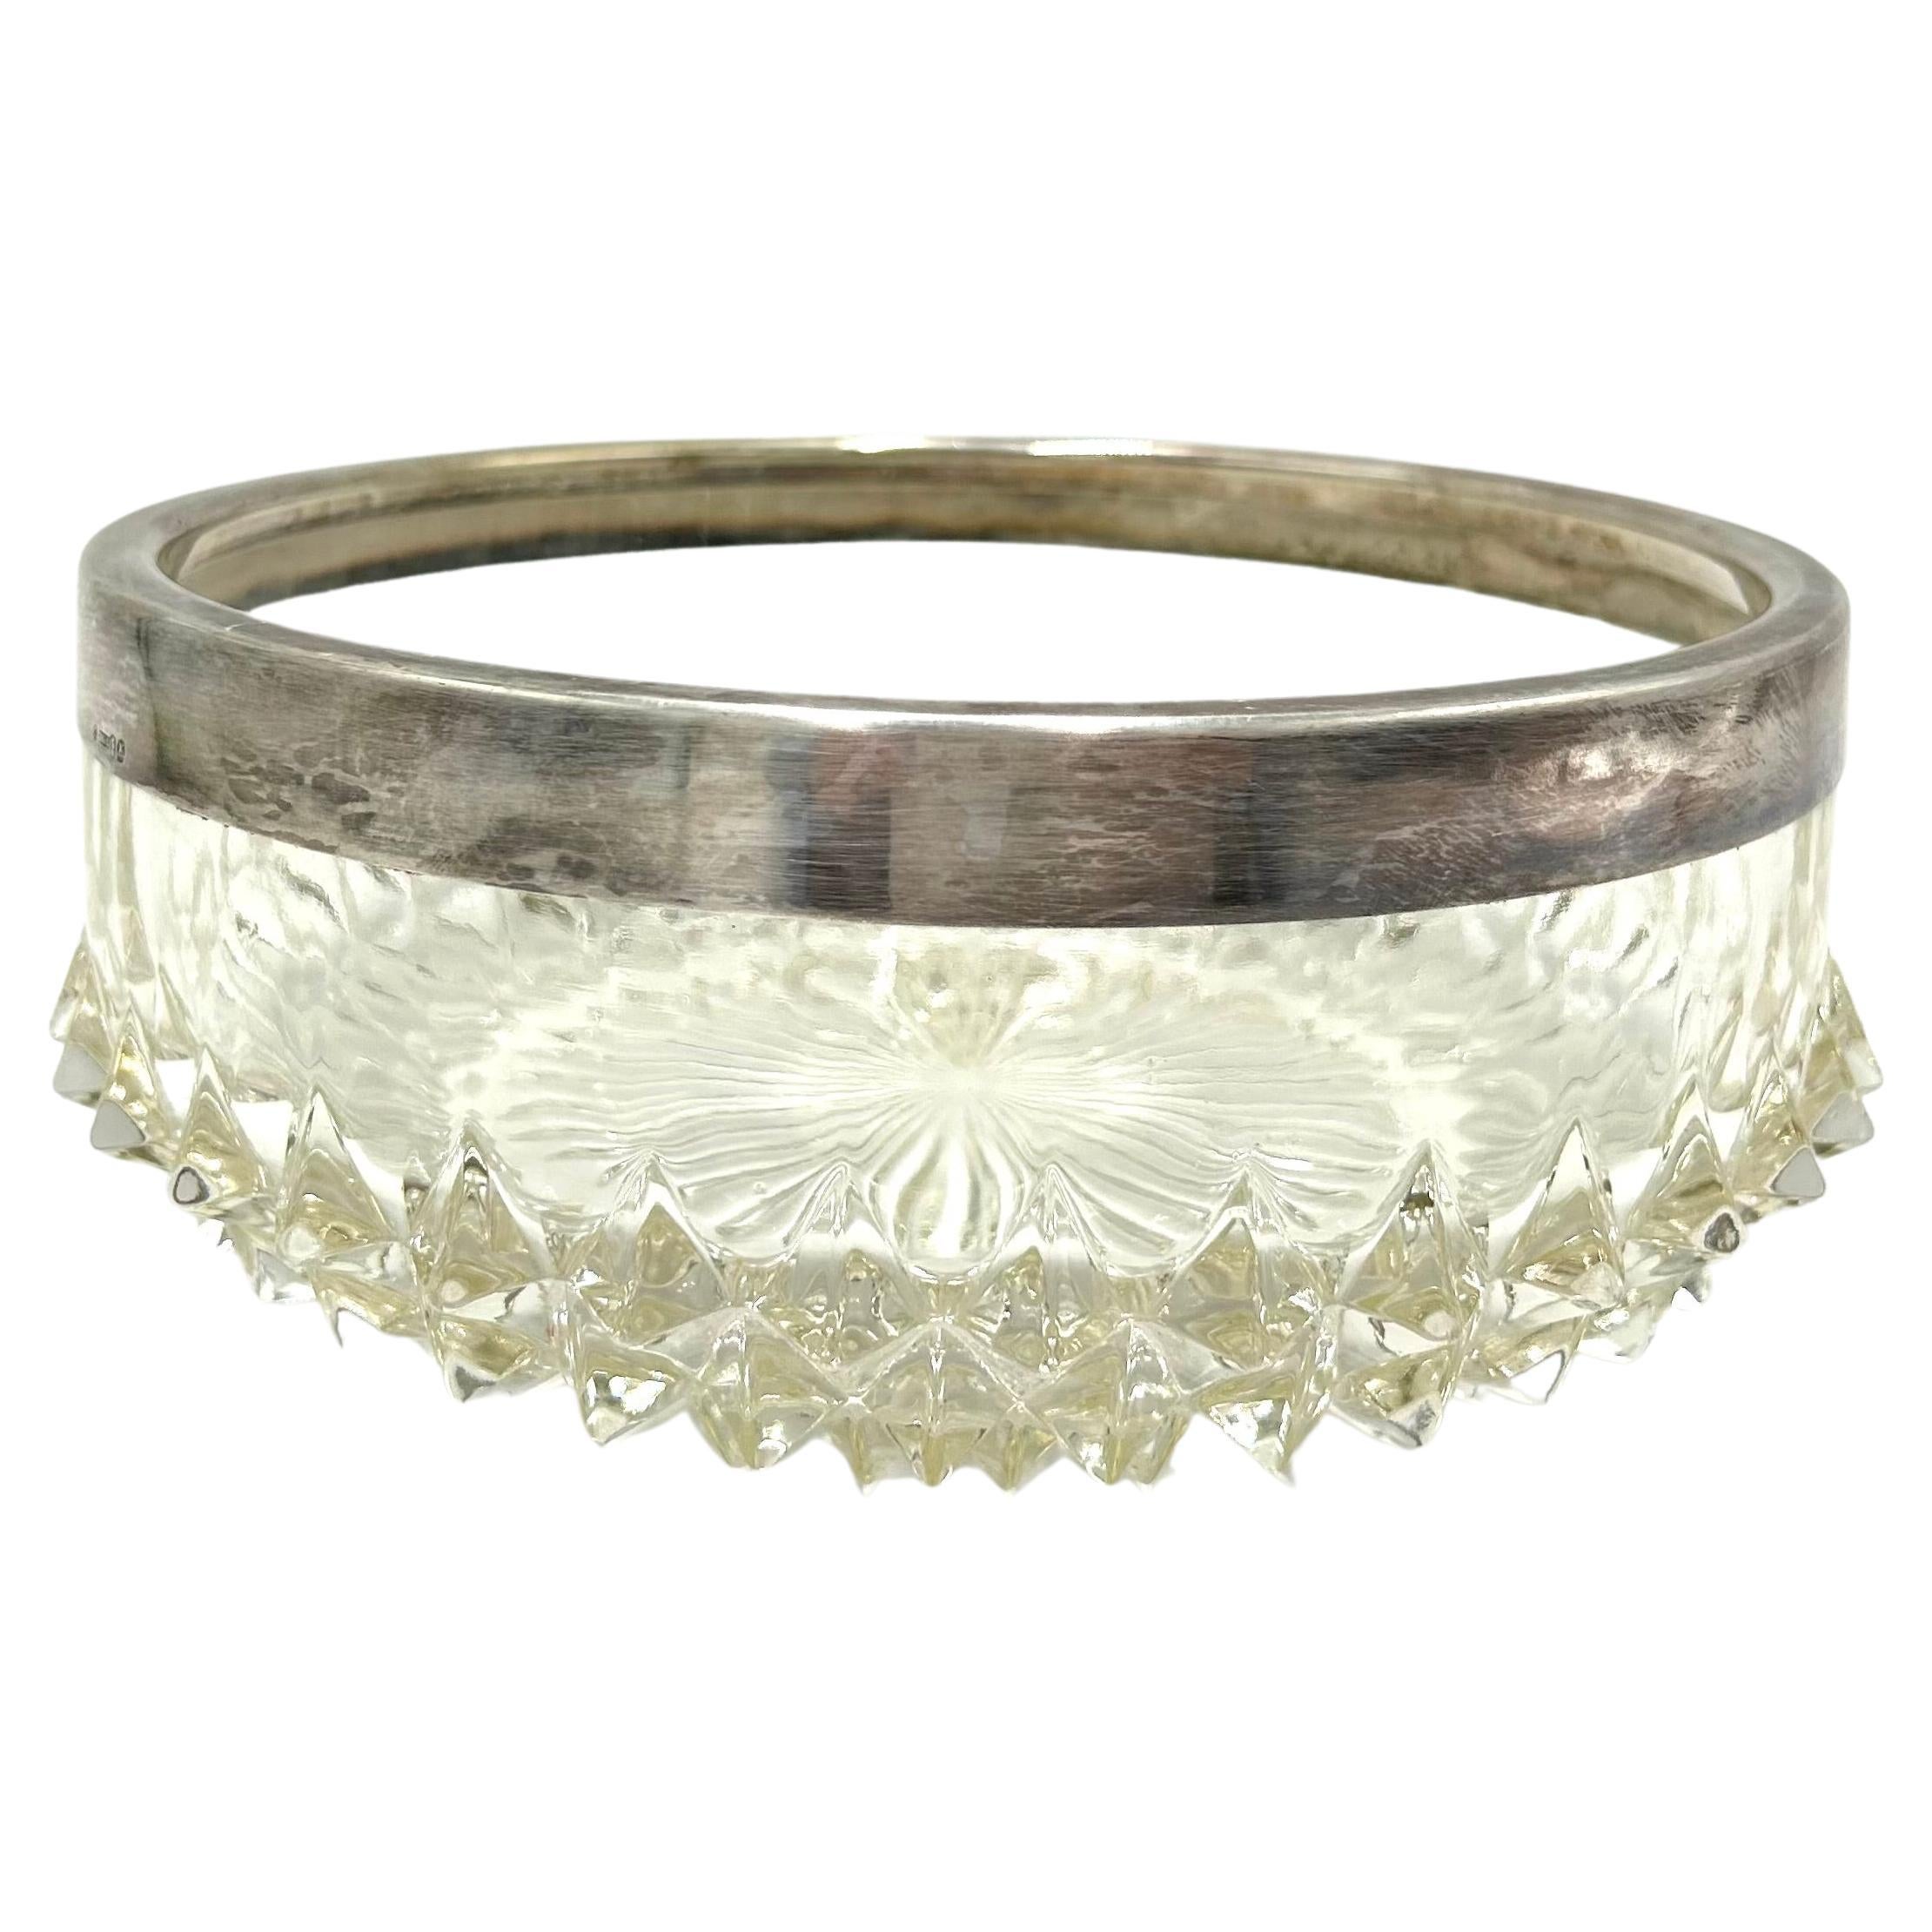 Crystal Bowl with a Silver Ring